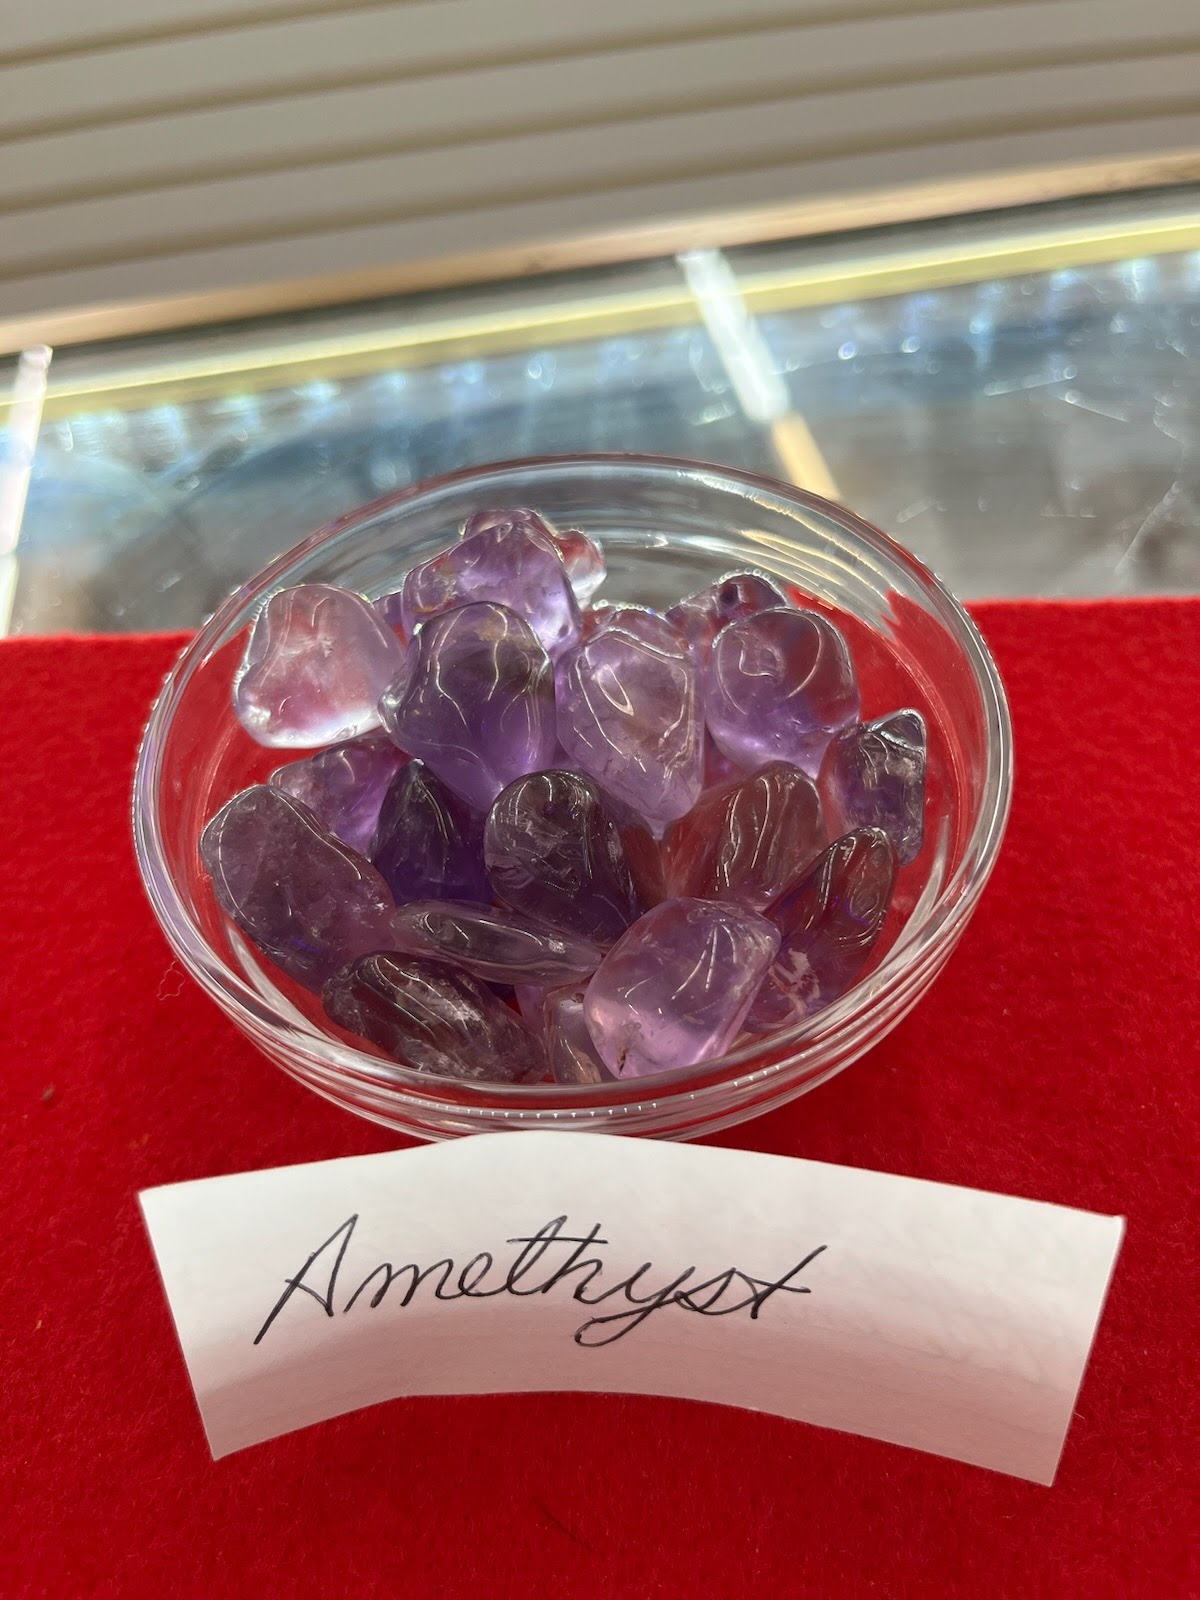 A bowl of amethyst on top of a red table.